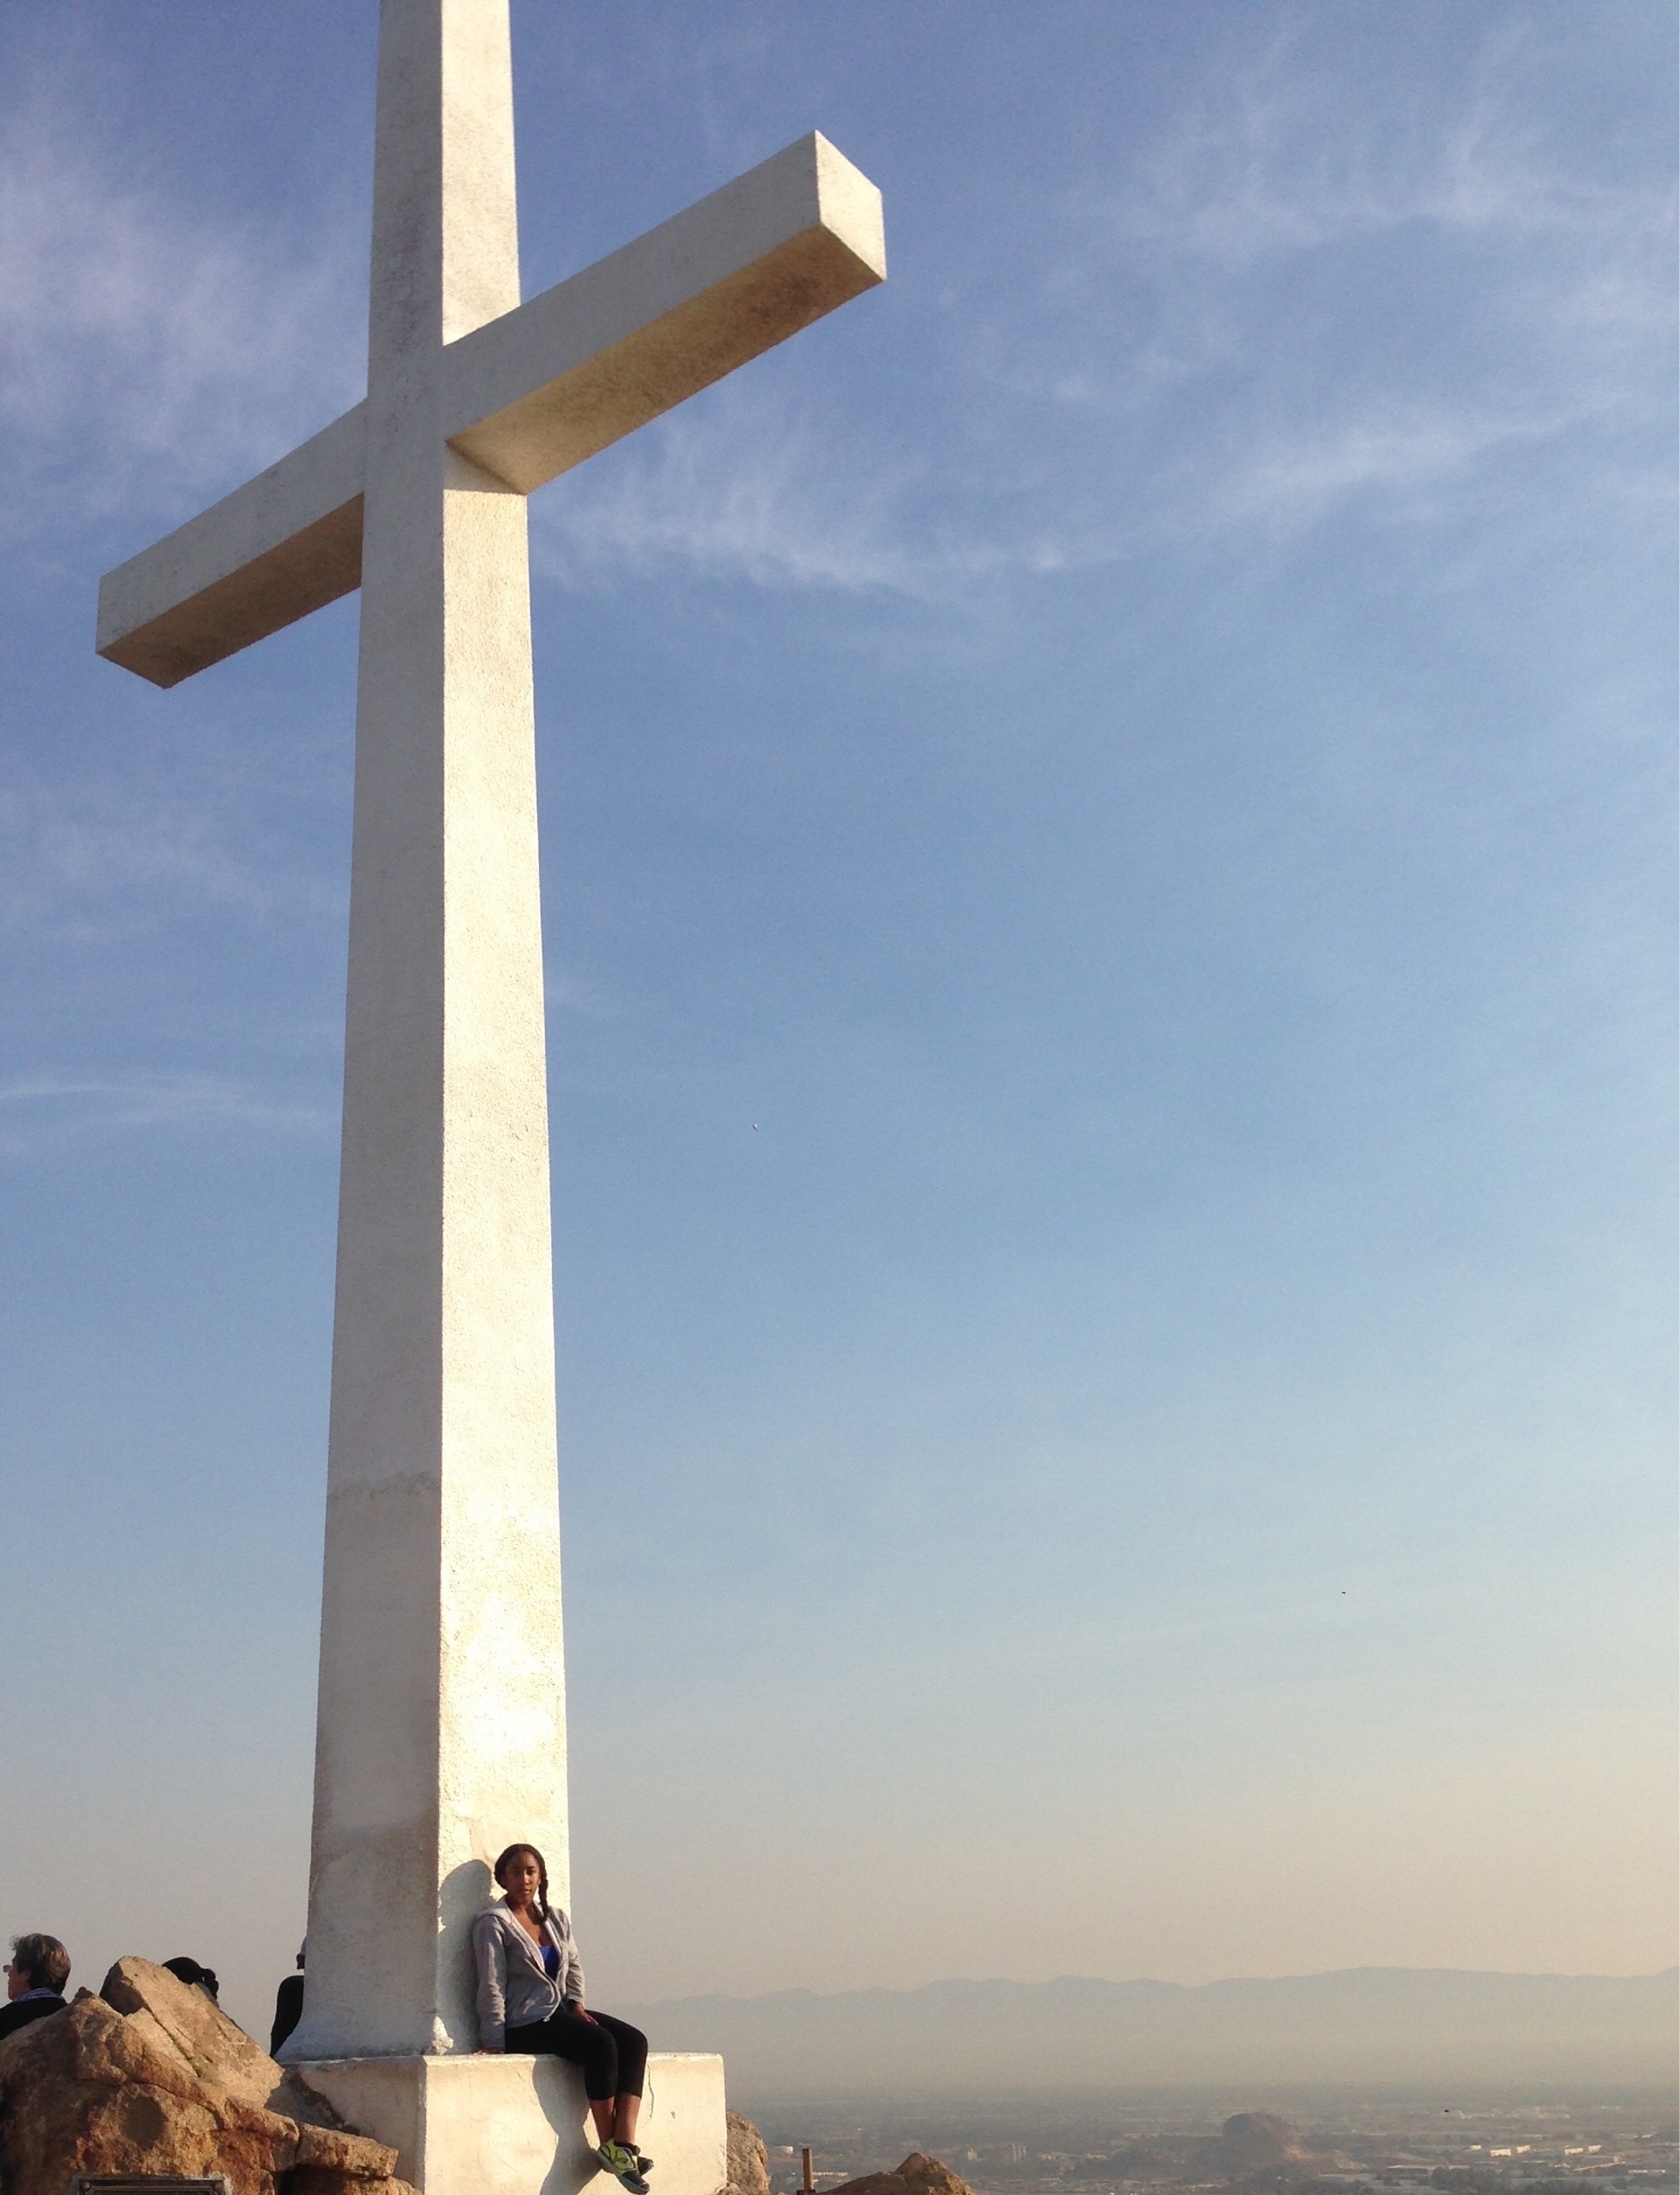 The cross at the very top of Mt. Rubidoux • #Riverside #CA #IE #Cross 